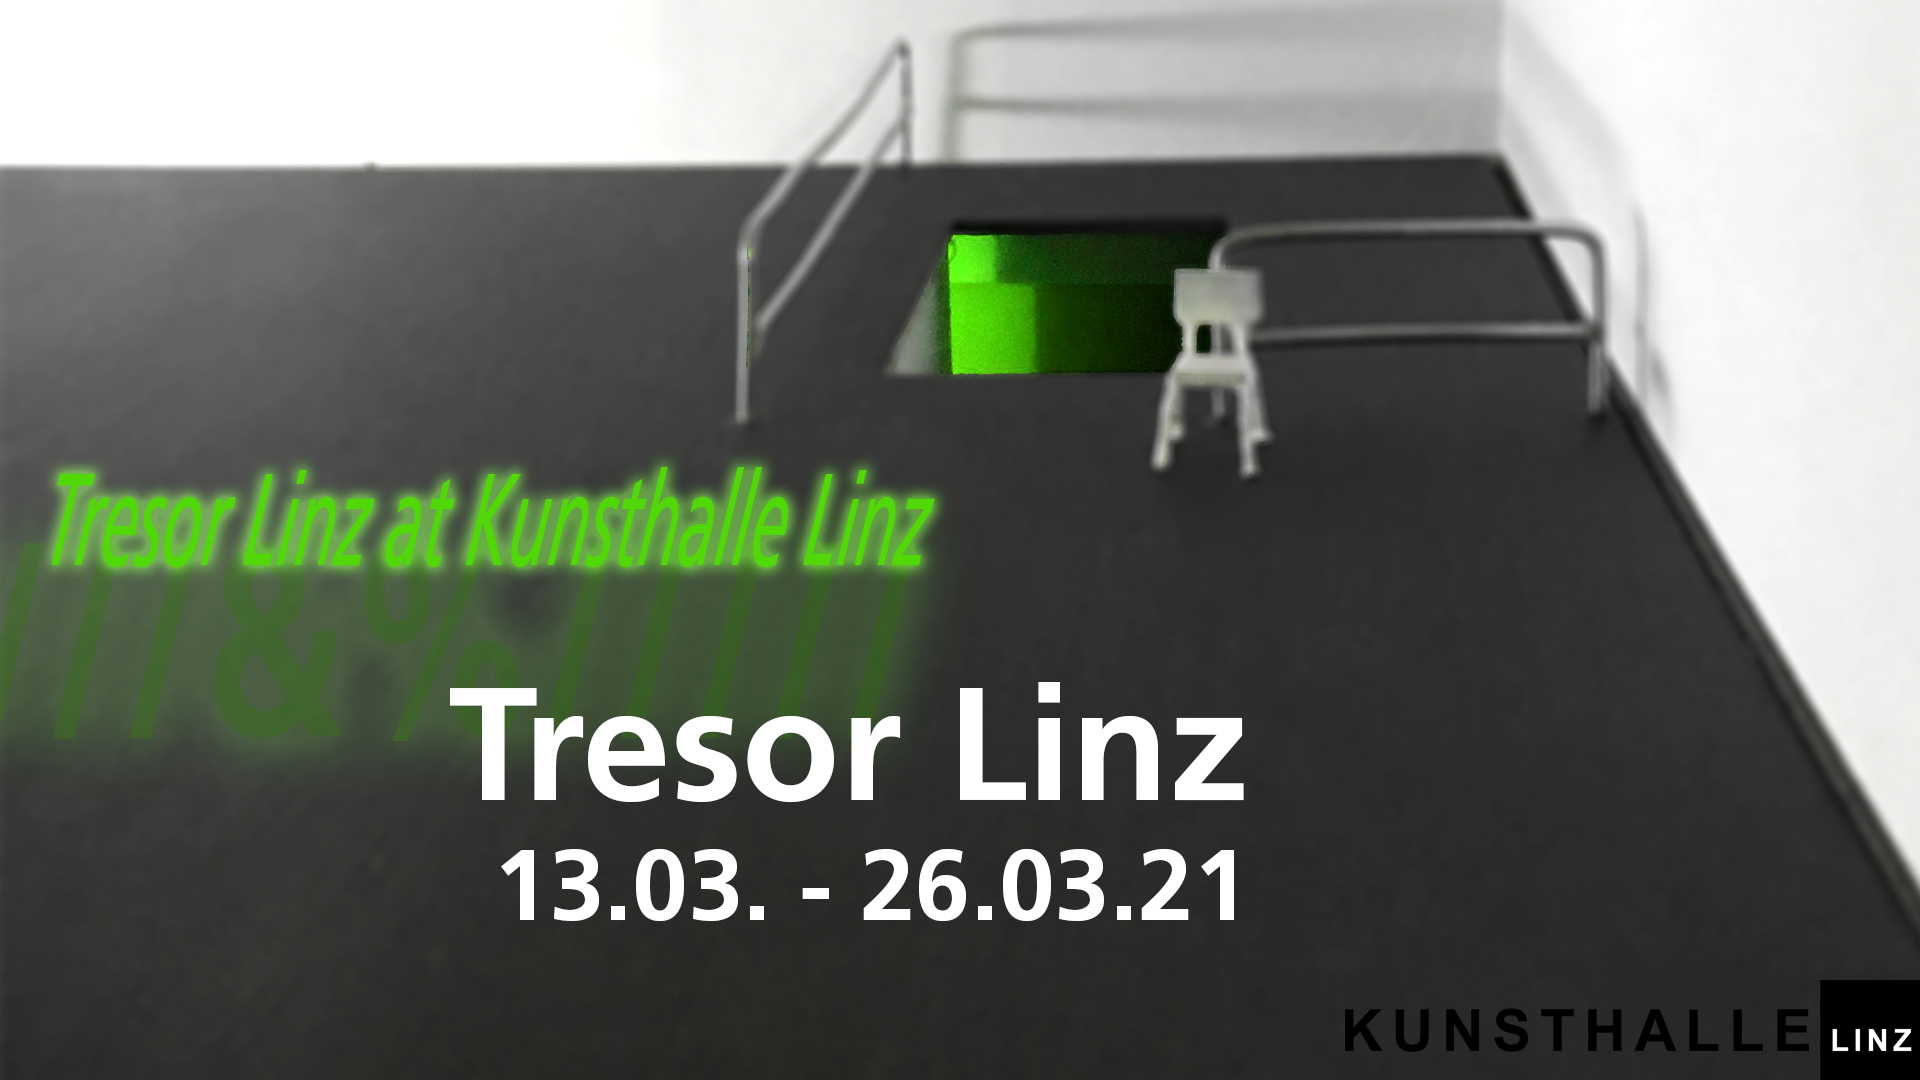 drkmbnt at Szene Panorama 3: Tresor Linz at Kunsthalle Linz